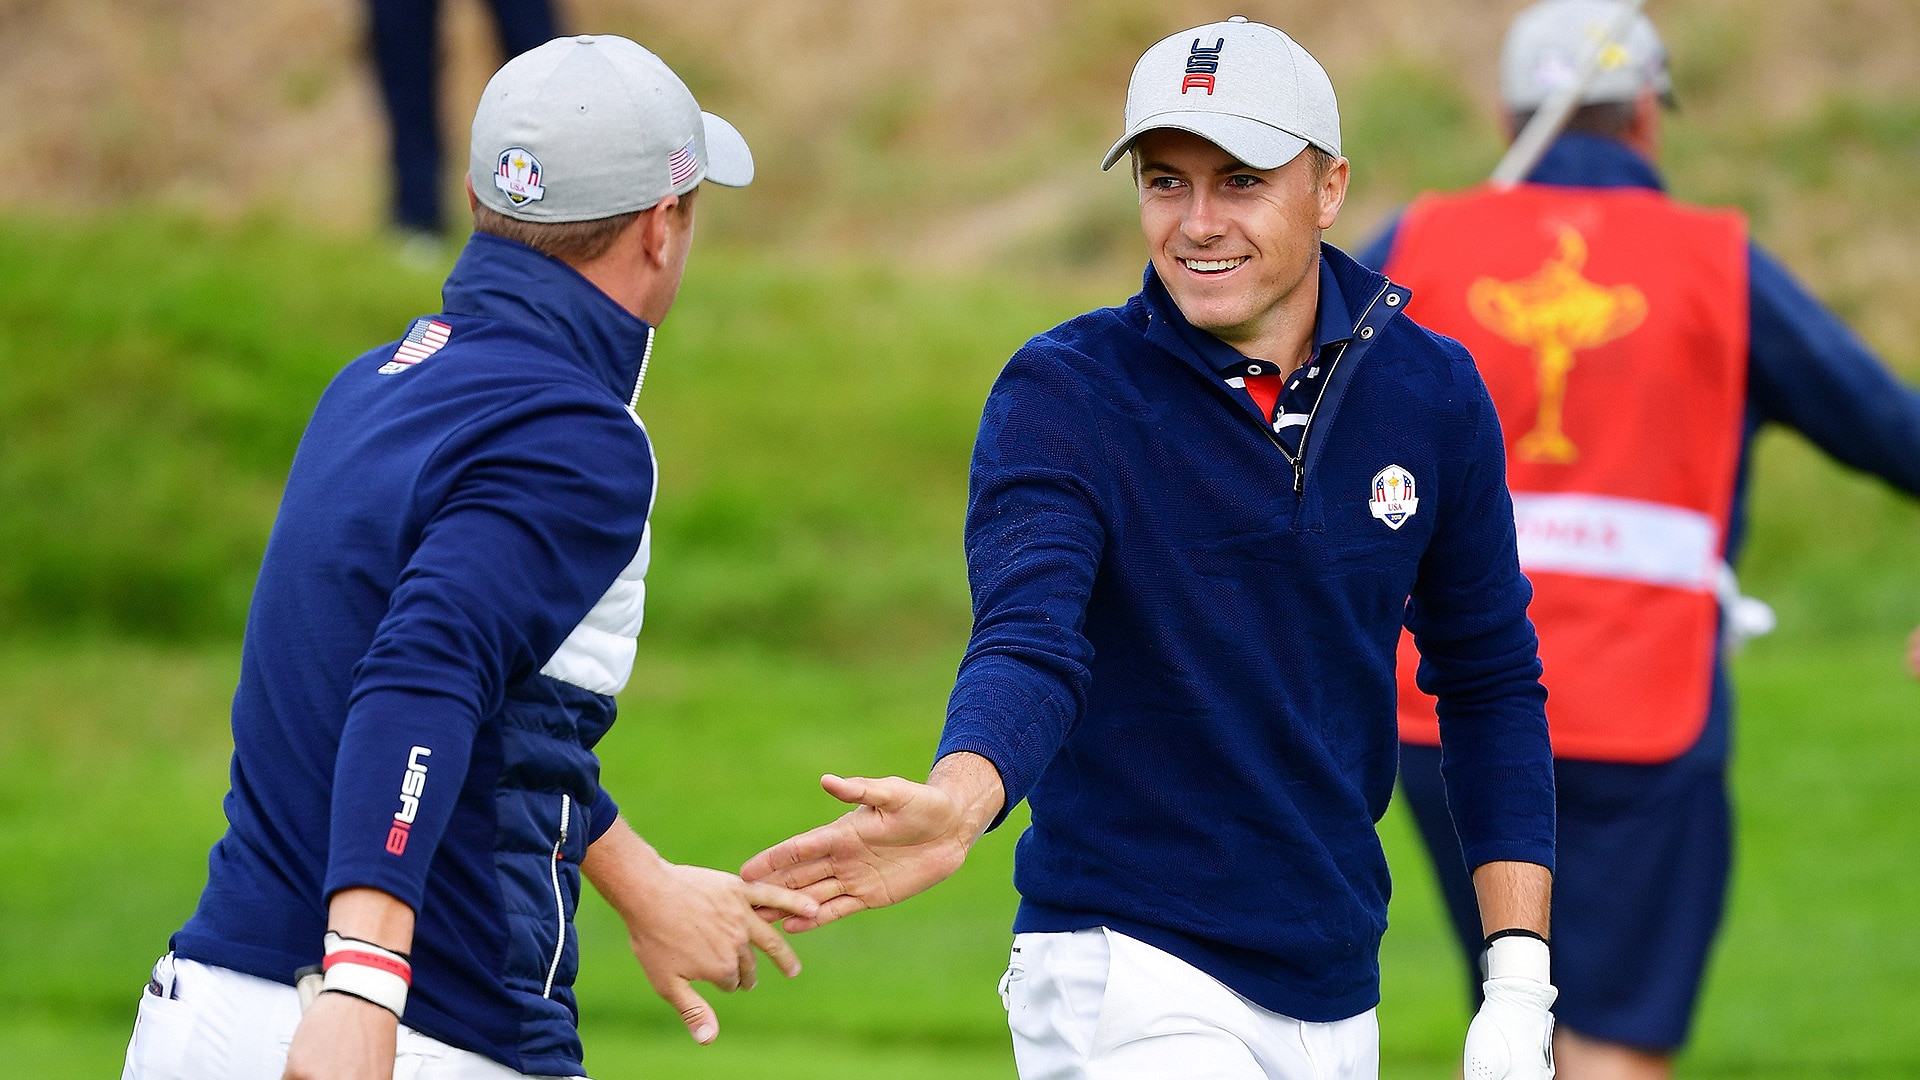 How to watch the 2021 Ryder Cup on Golf Channel and NBC Sports